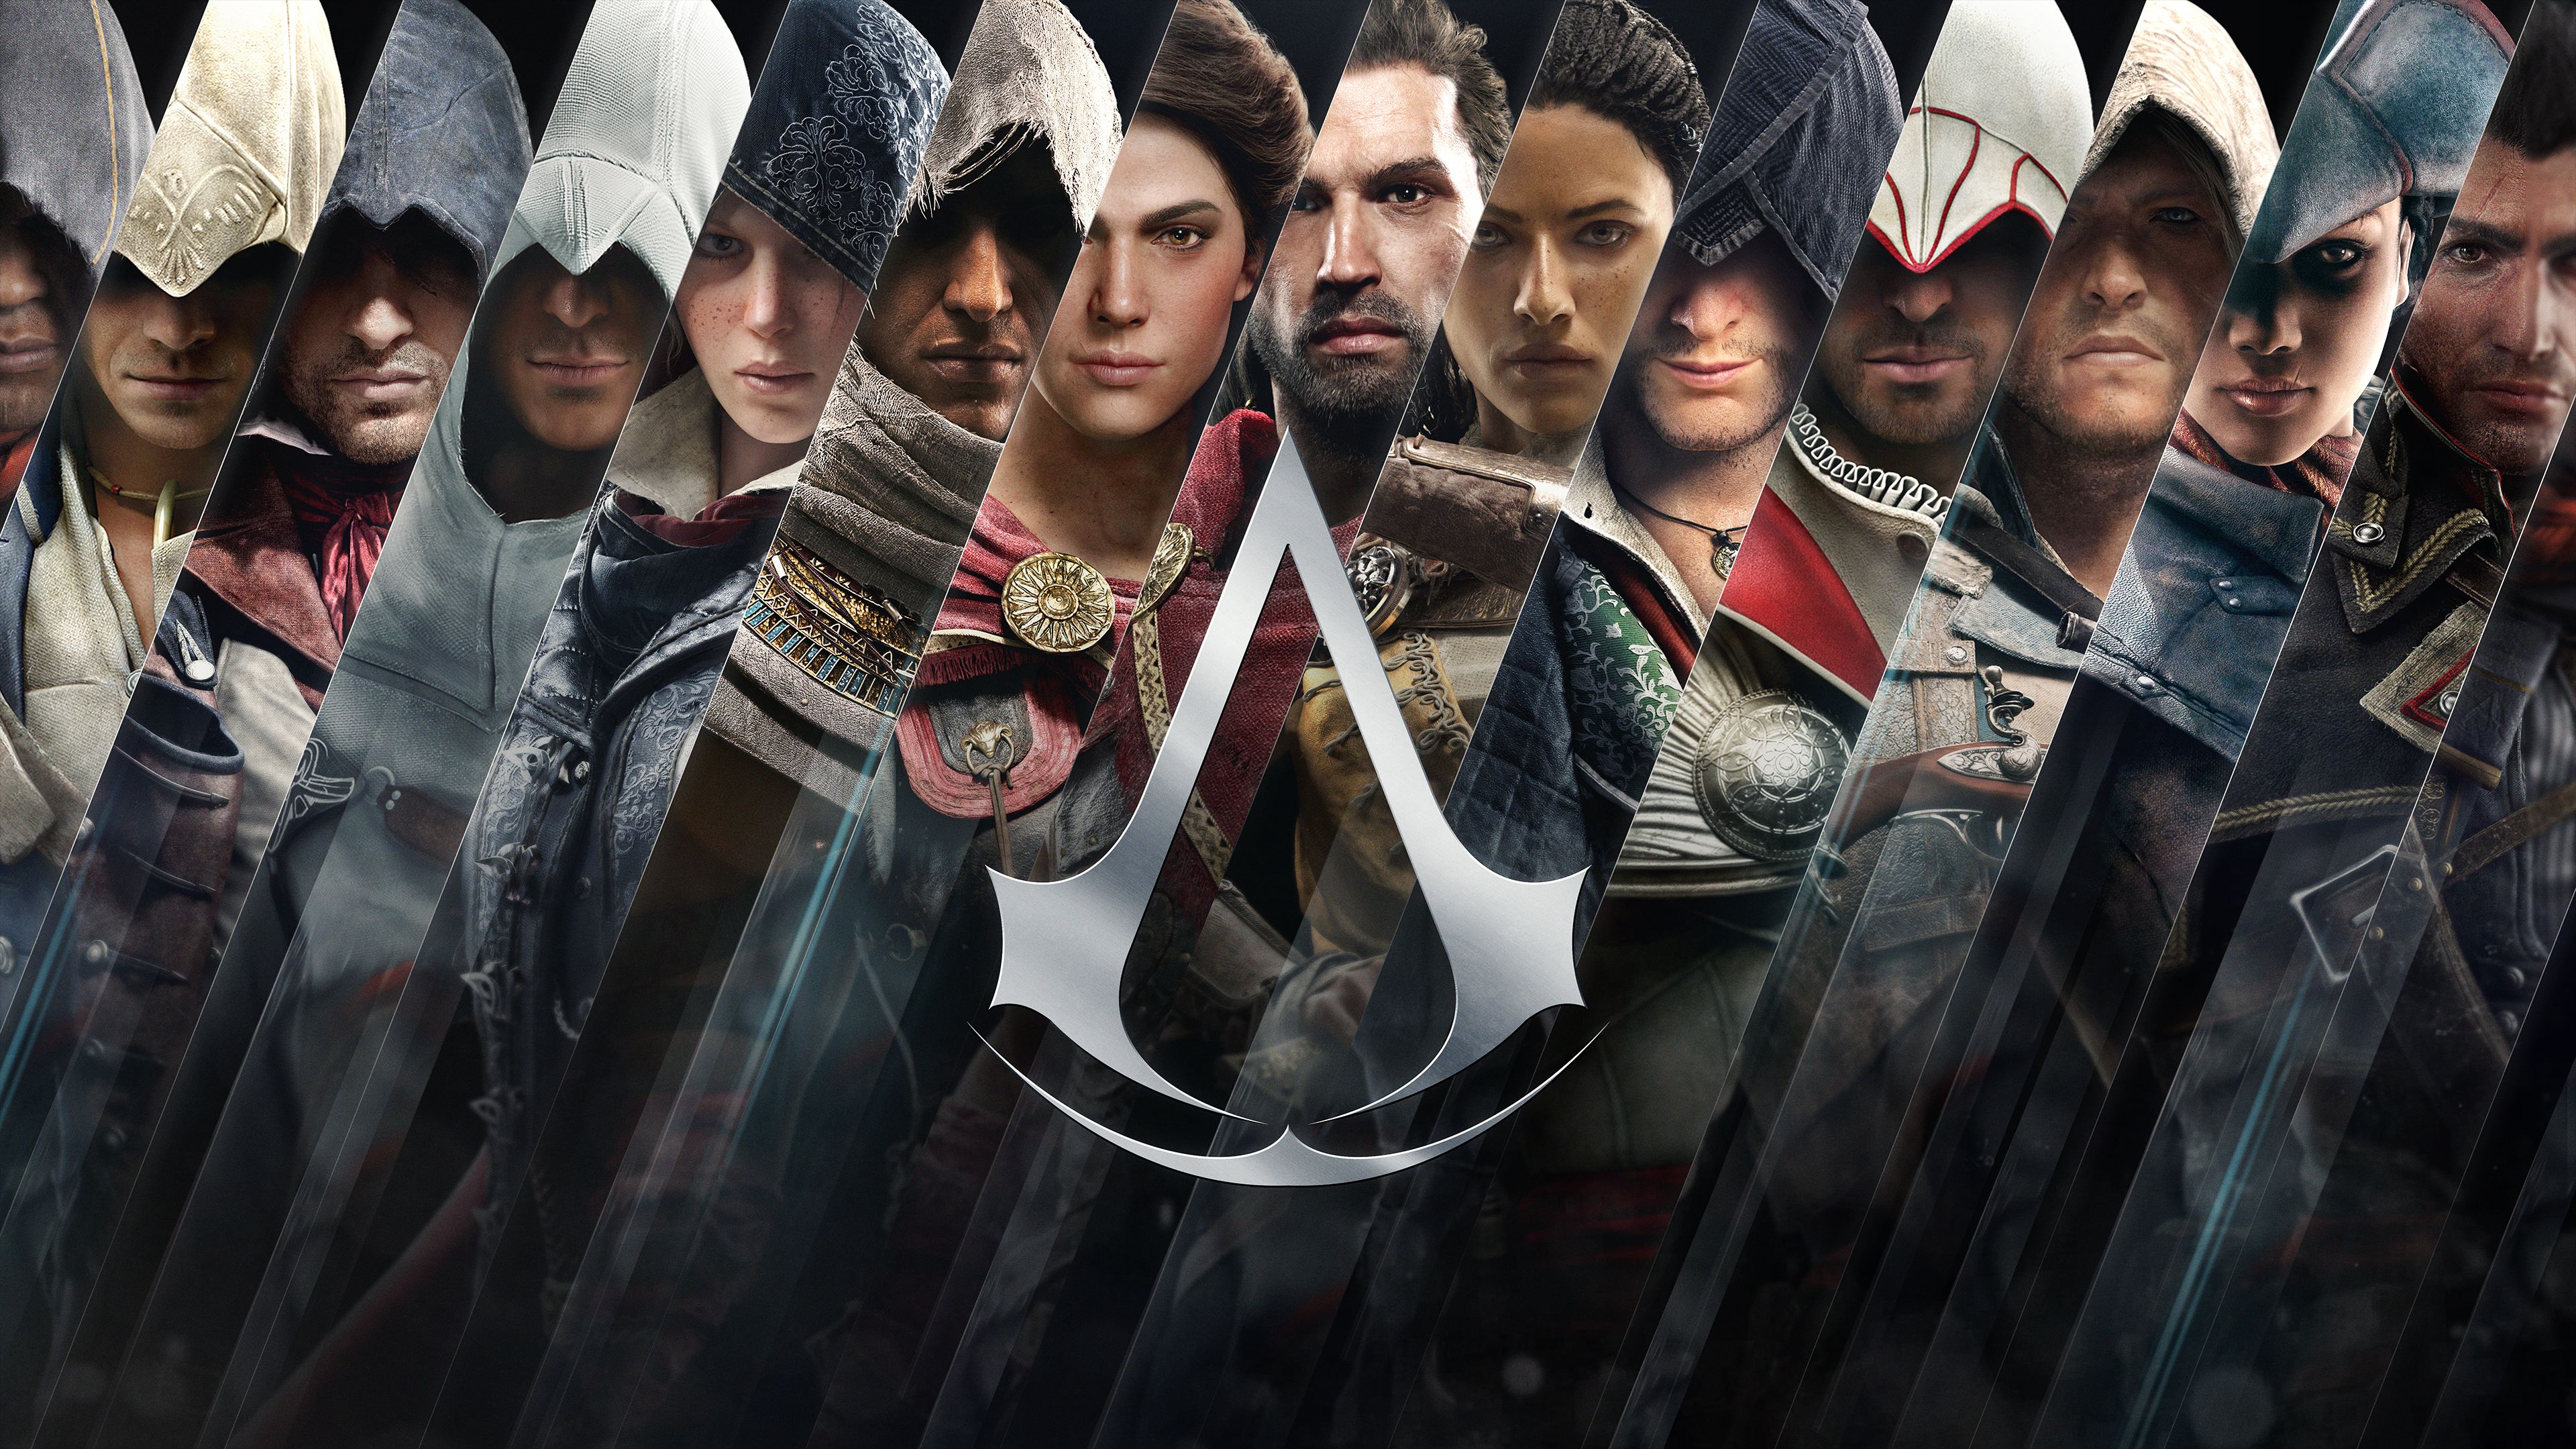 assassin's creed, video game, altair (assassin's creed), ezio (assassin's creed)